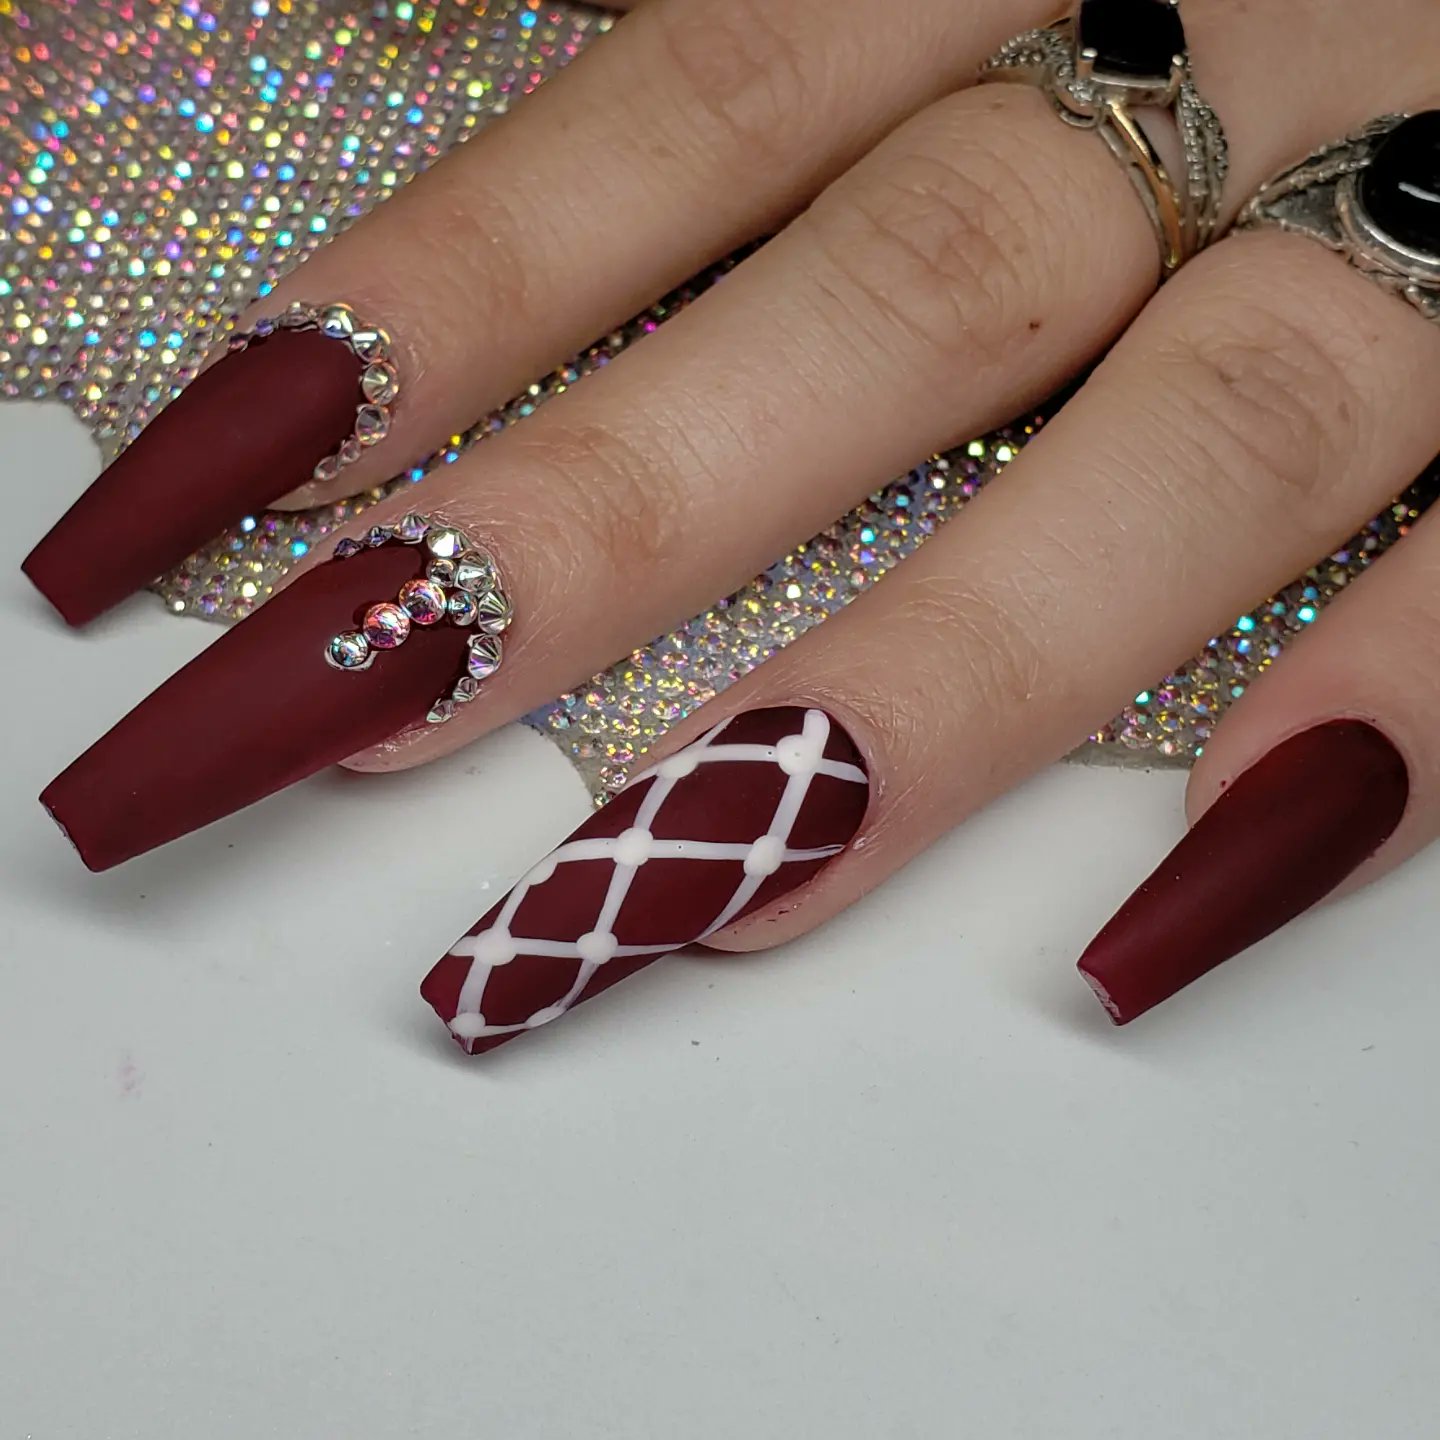 Red Heart French Tip Coffin Wave Swirl Press On Nails Kit - TGC Boutique